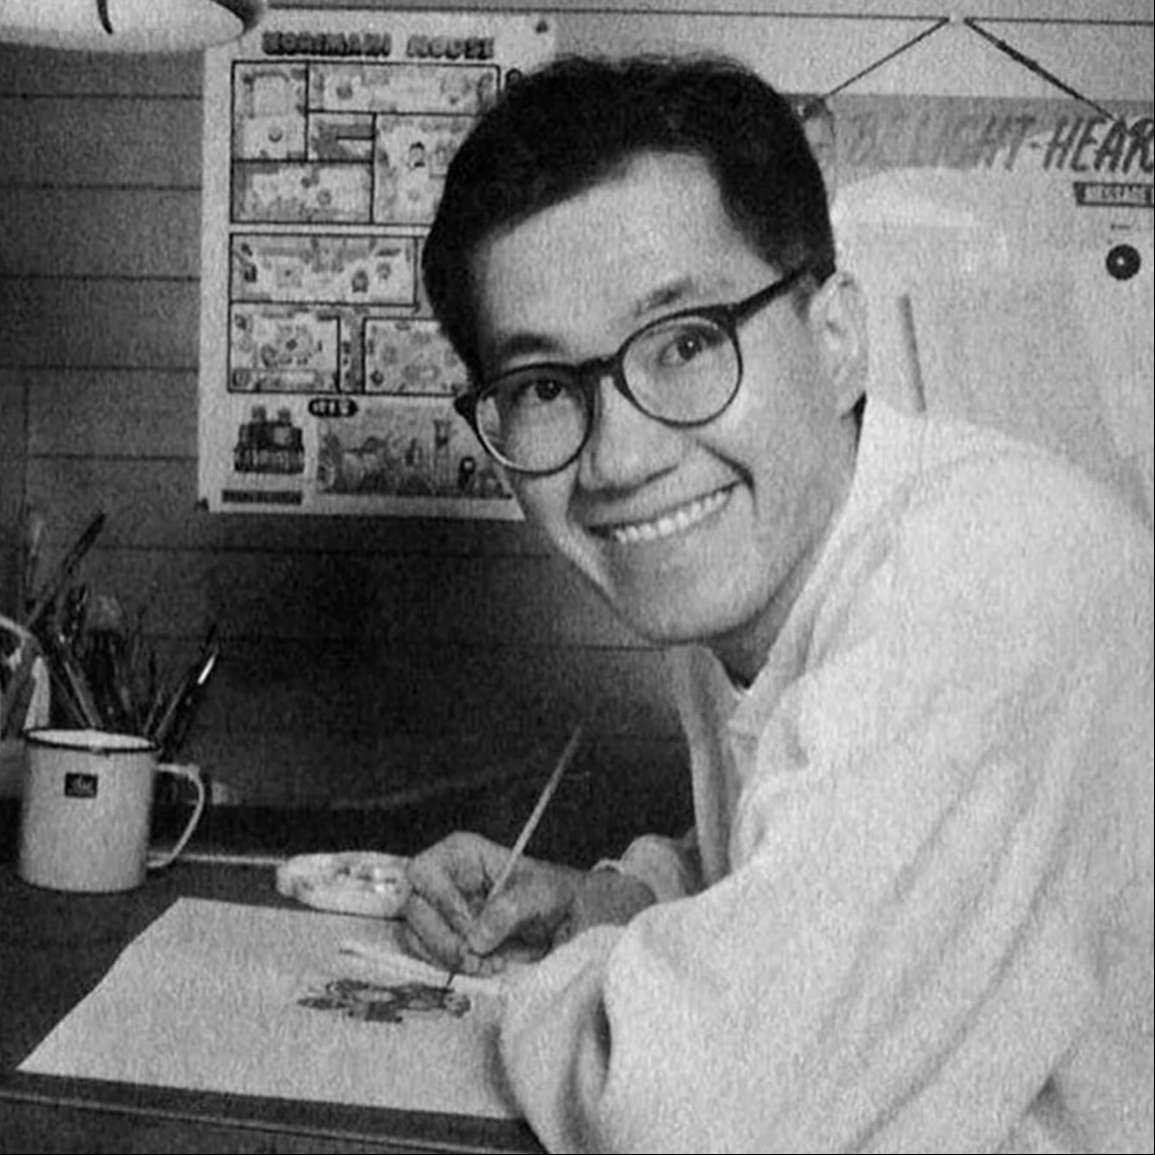 Author Akira Toriyama of one of the best selling series in Japan, Dragon Ball, along with famous anime series, passed away on March 8, 2024. He passed away at the age of 68.1